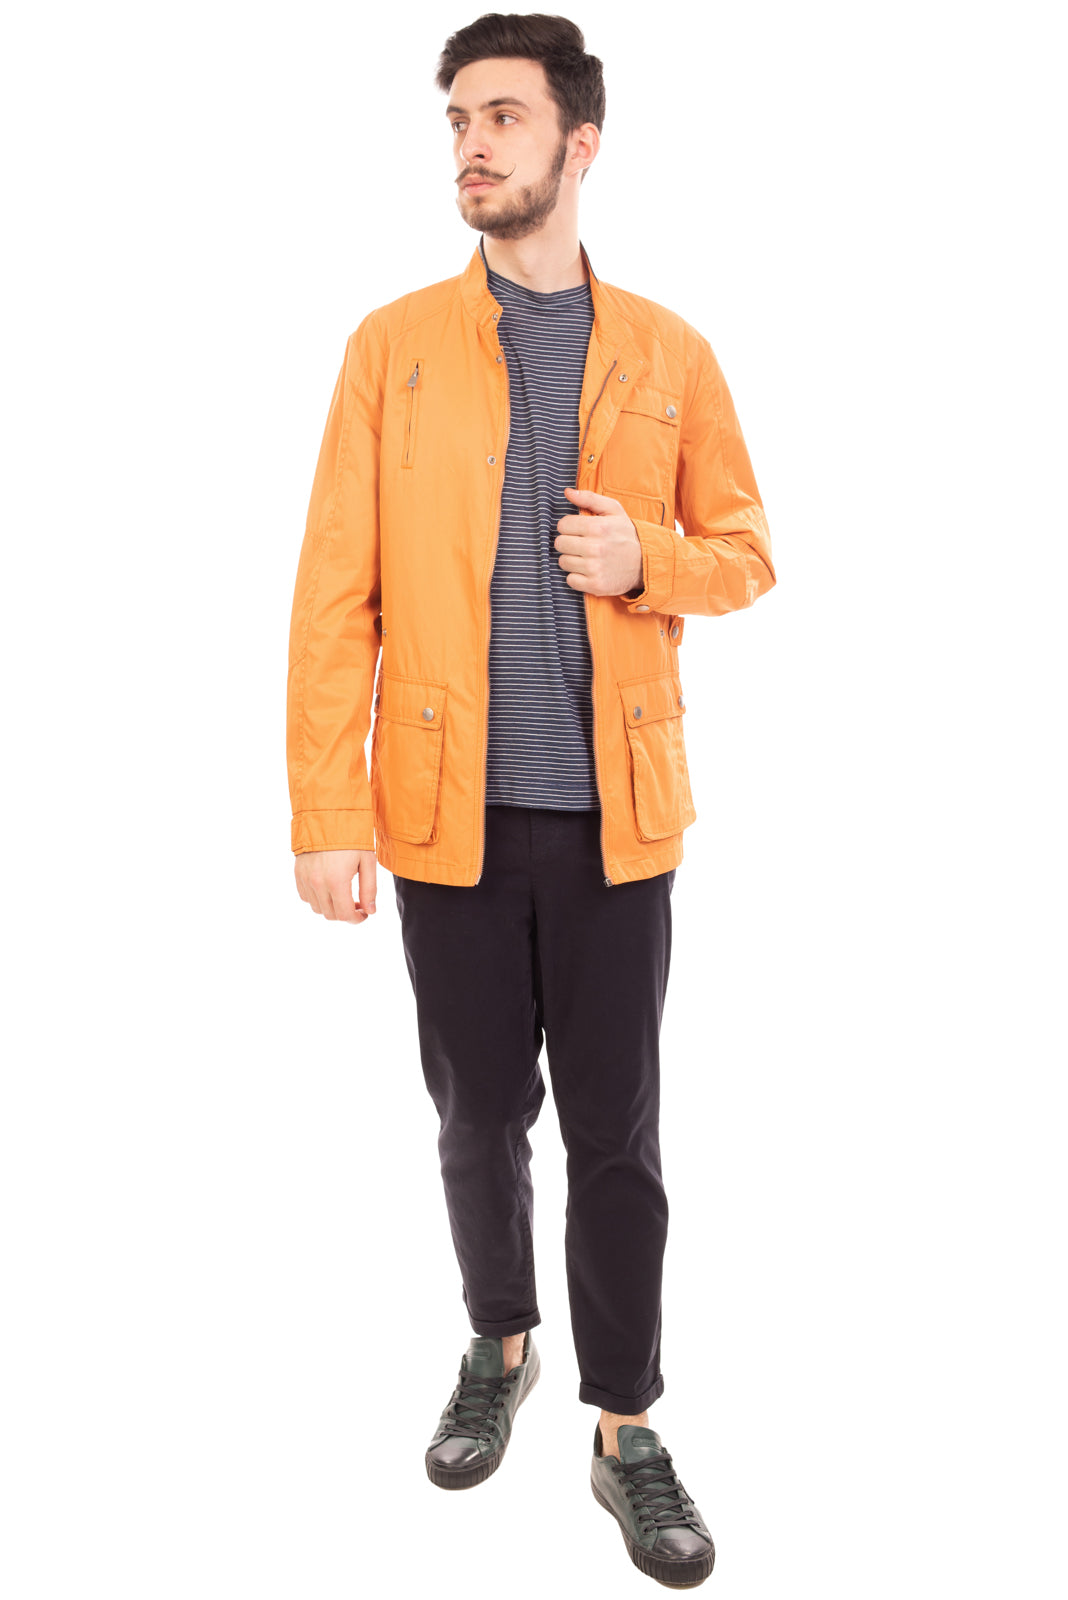 JEAN BIANI Jacket Size 52 / XL Orange Partly Lined Full Zip Stand-Up Collar gallery main photo